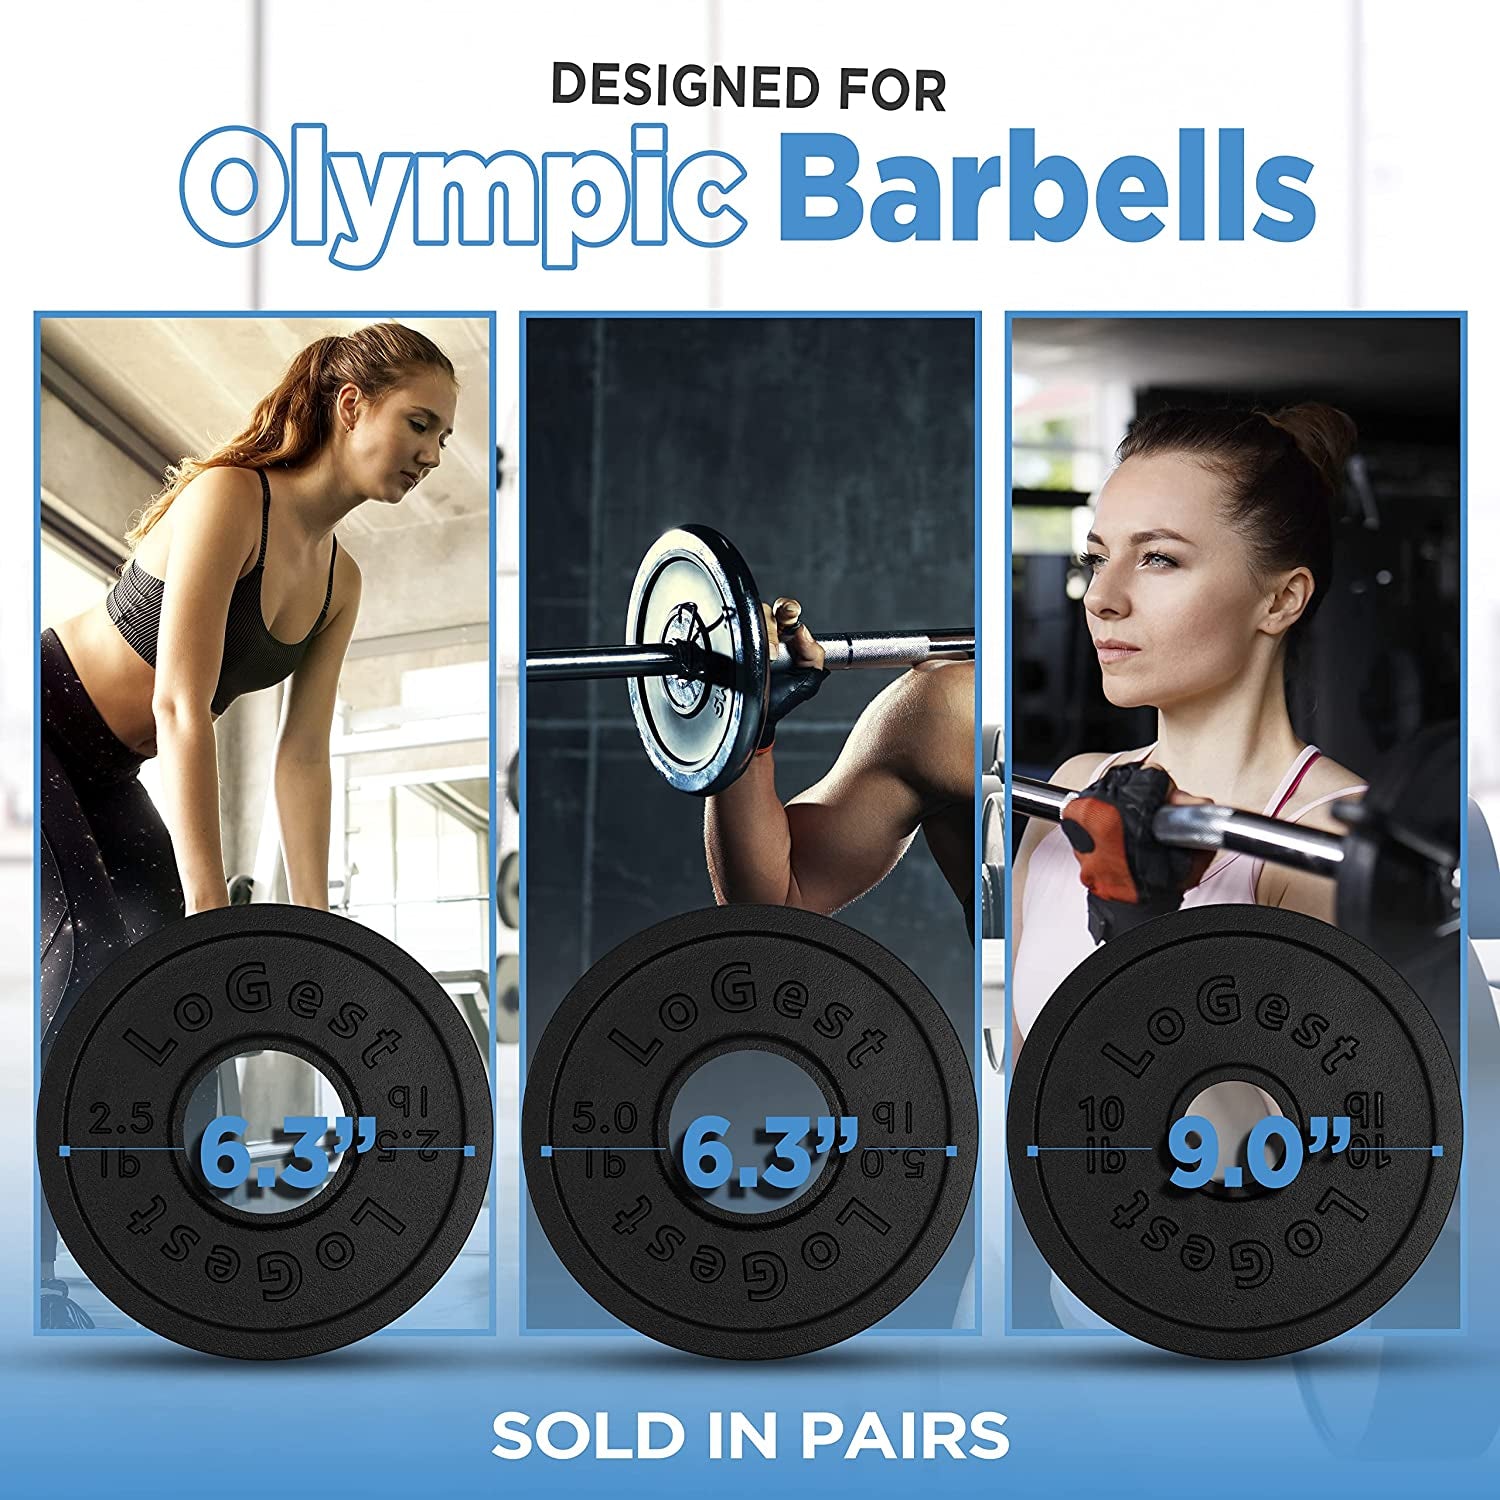 Pair Olympic Plates - Barbell Weights Set of 2 Weight Plates for Olympic Bars Perfect for Strength Training Plates Exercise Balance Available in 2.5LB 5LB 10LB Weight Plate